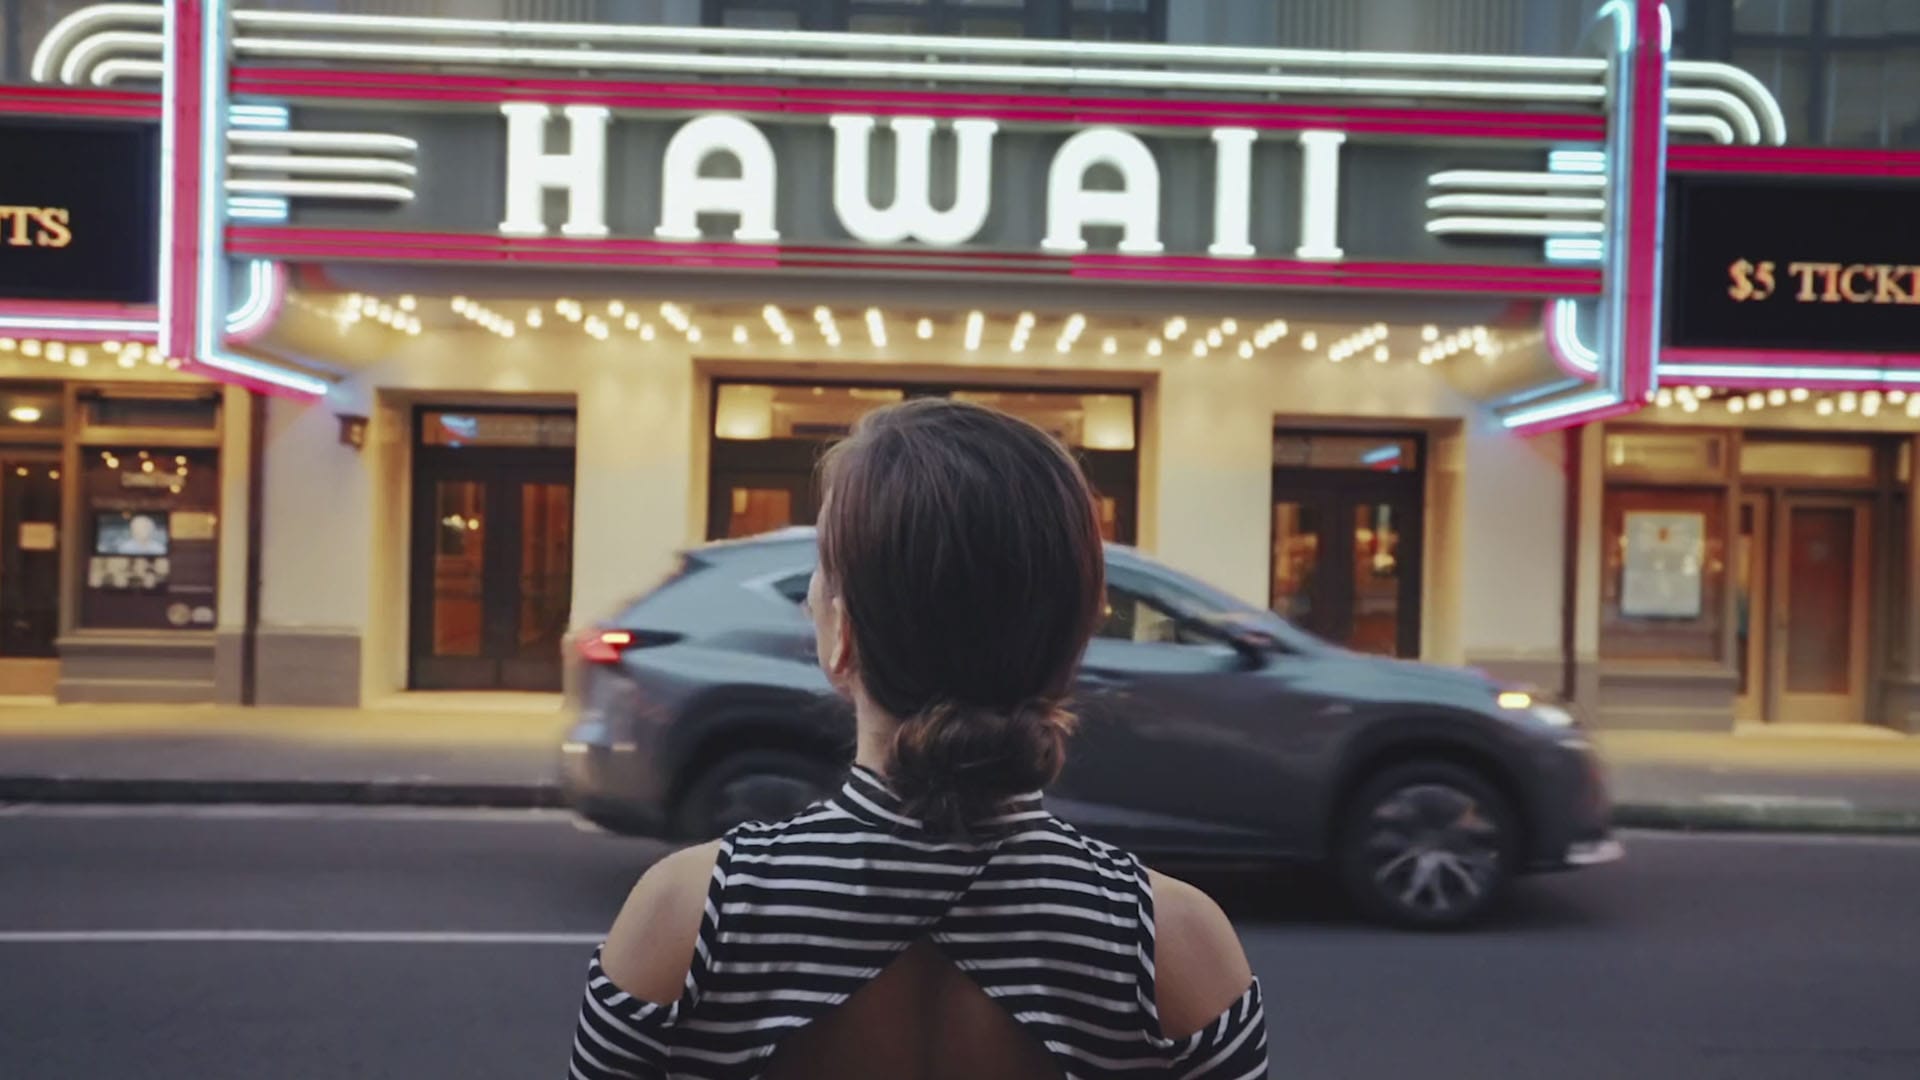 Follow the Journey: The Cousin on Oahu